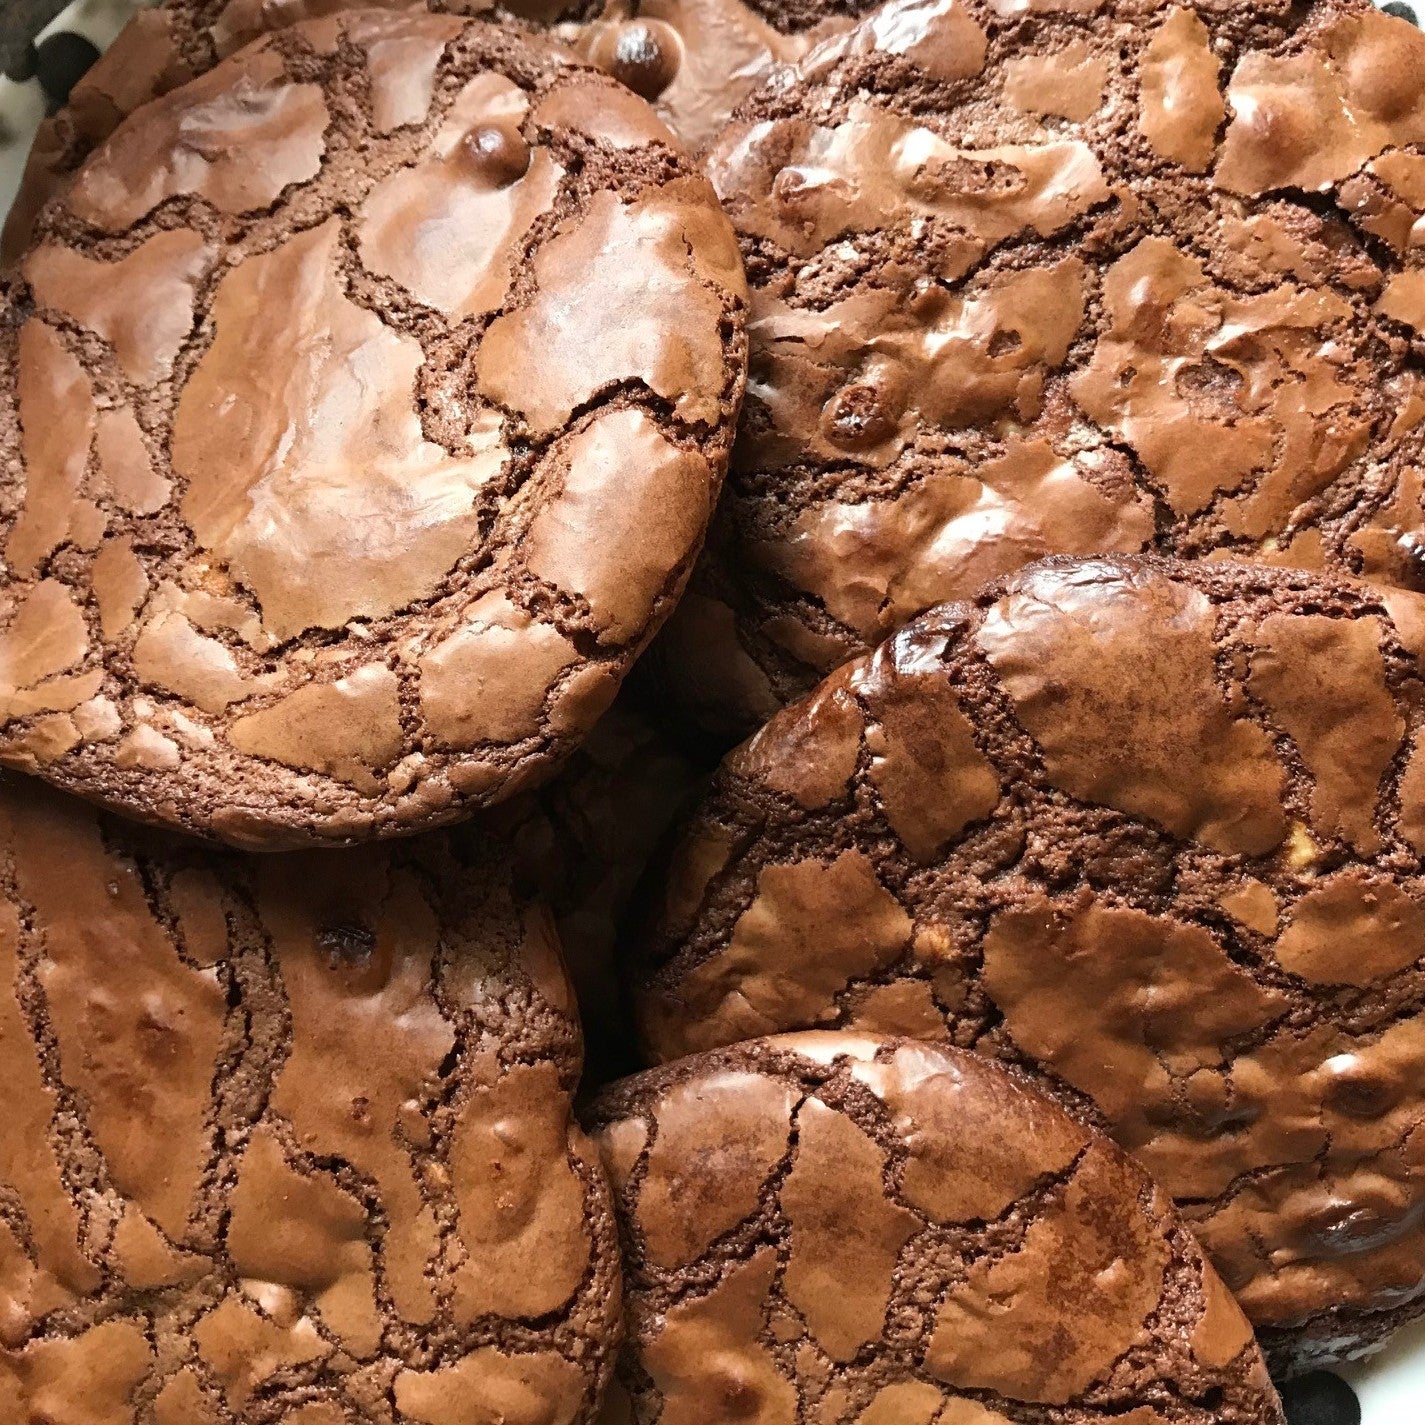 Chocolate cookies stacked on top of each other